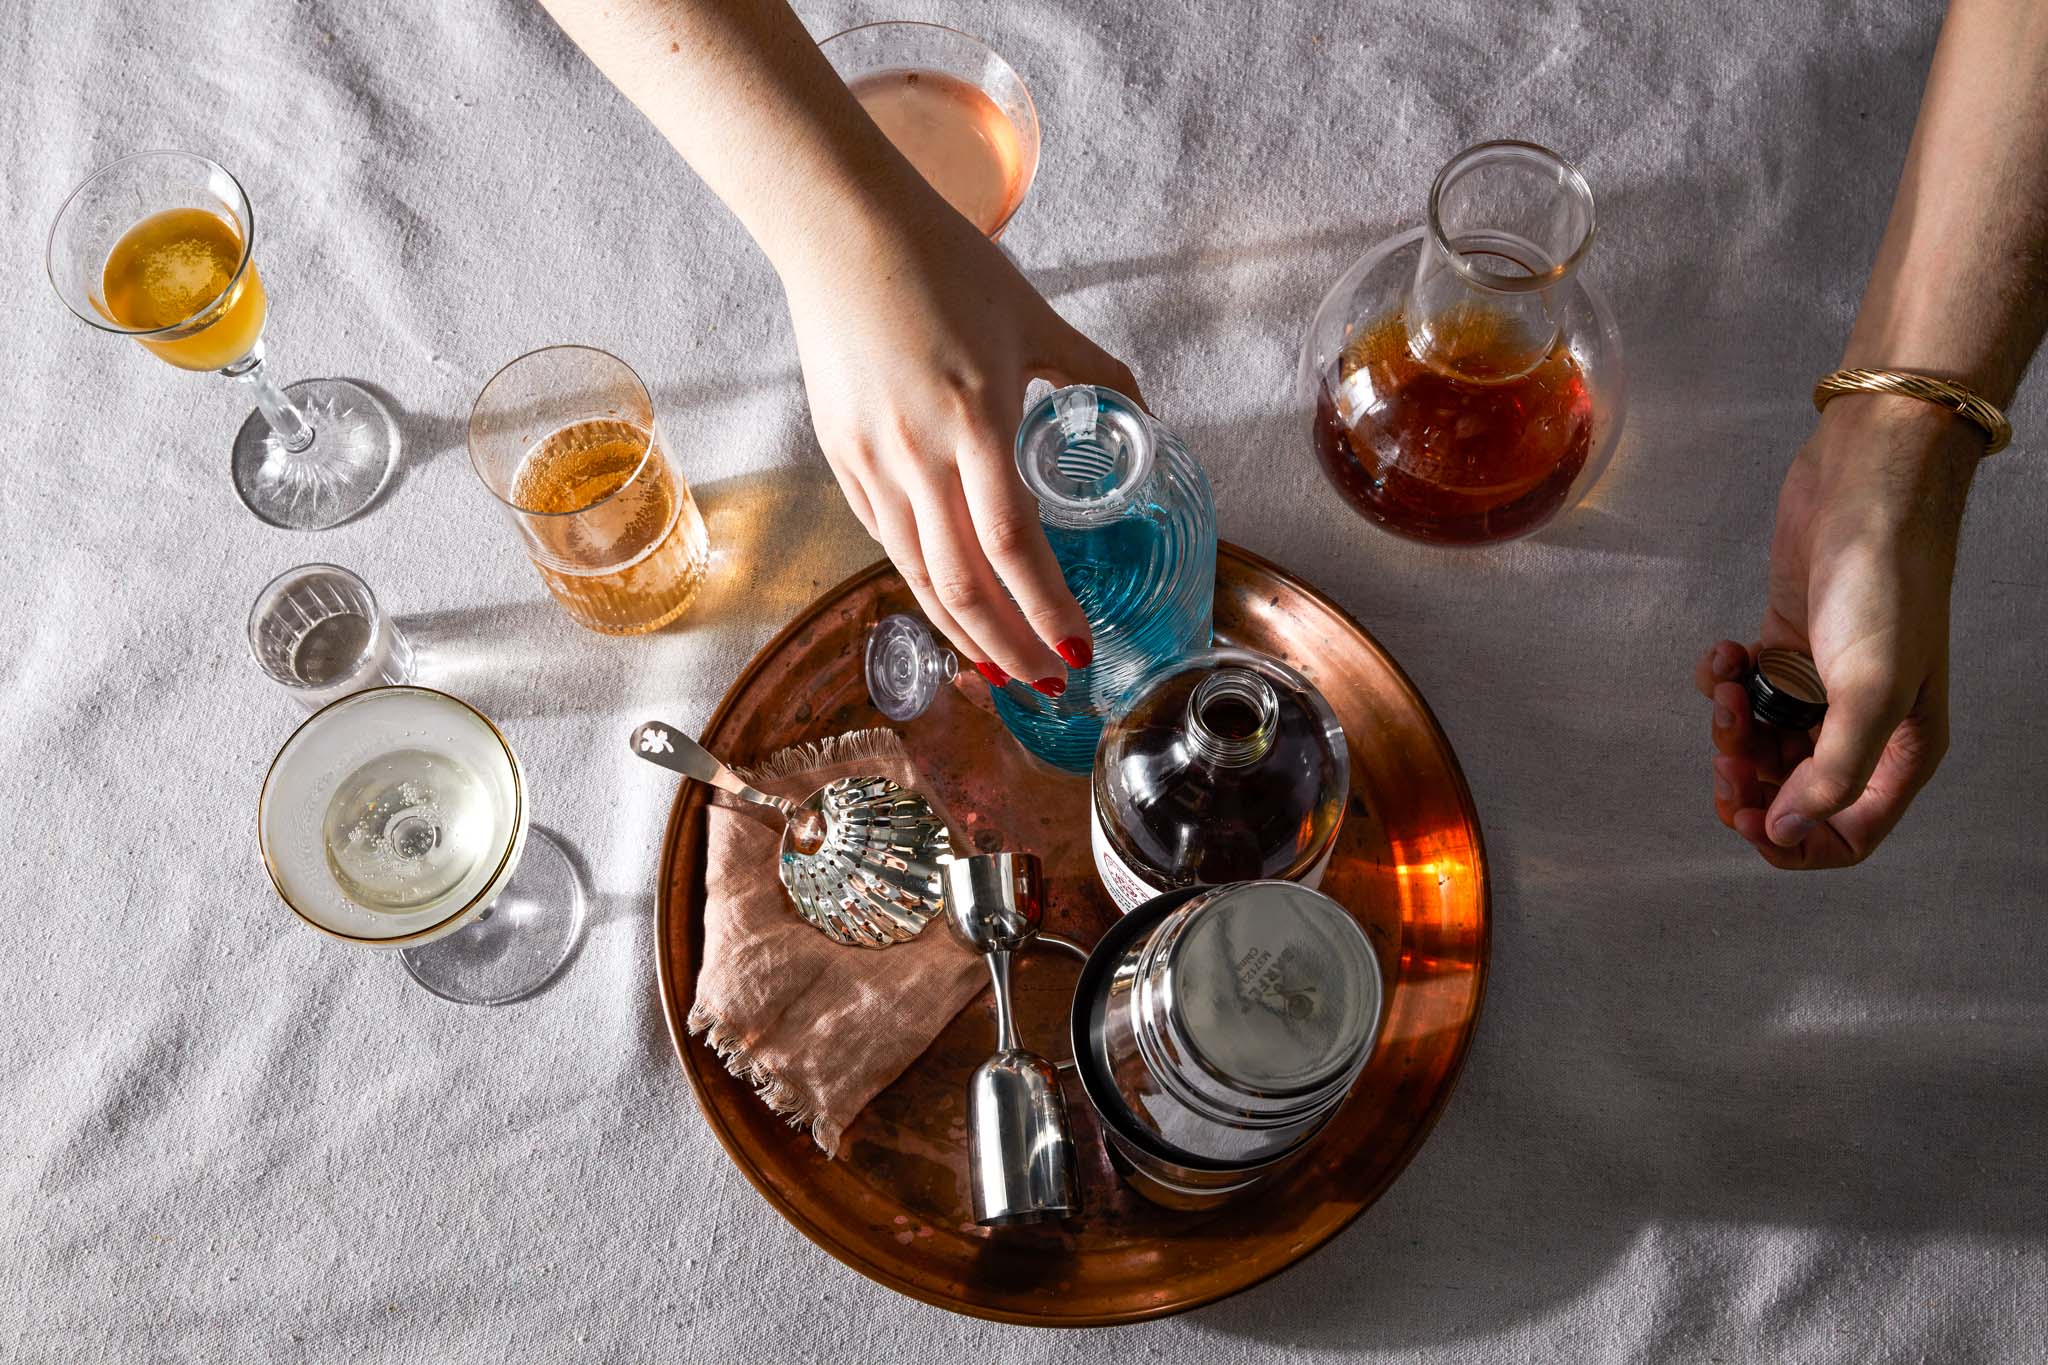 Various cocktail equipment and bottles on a bronze tray, slightly aged, with surrounding glassware on white table cloth. Two hands reach in to grab the bottles. 